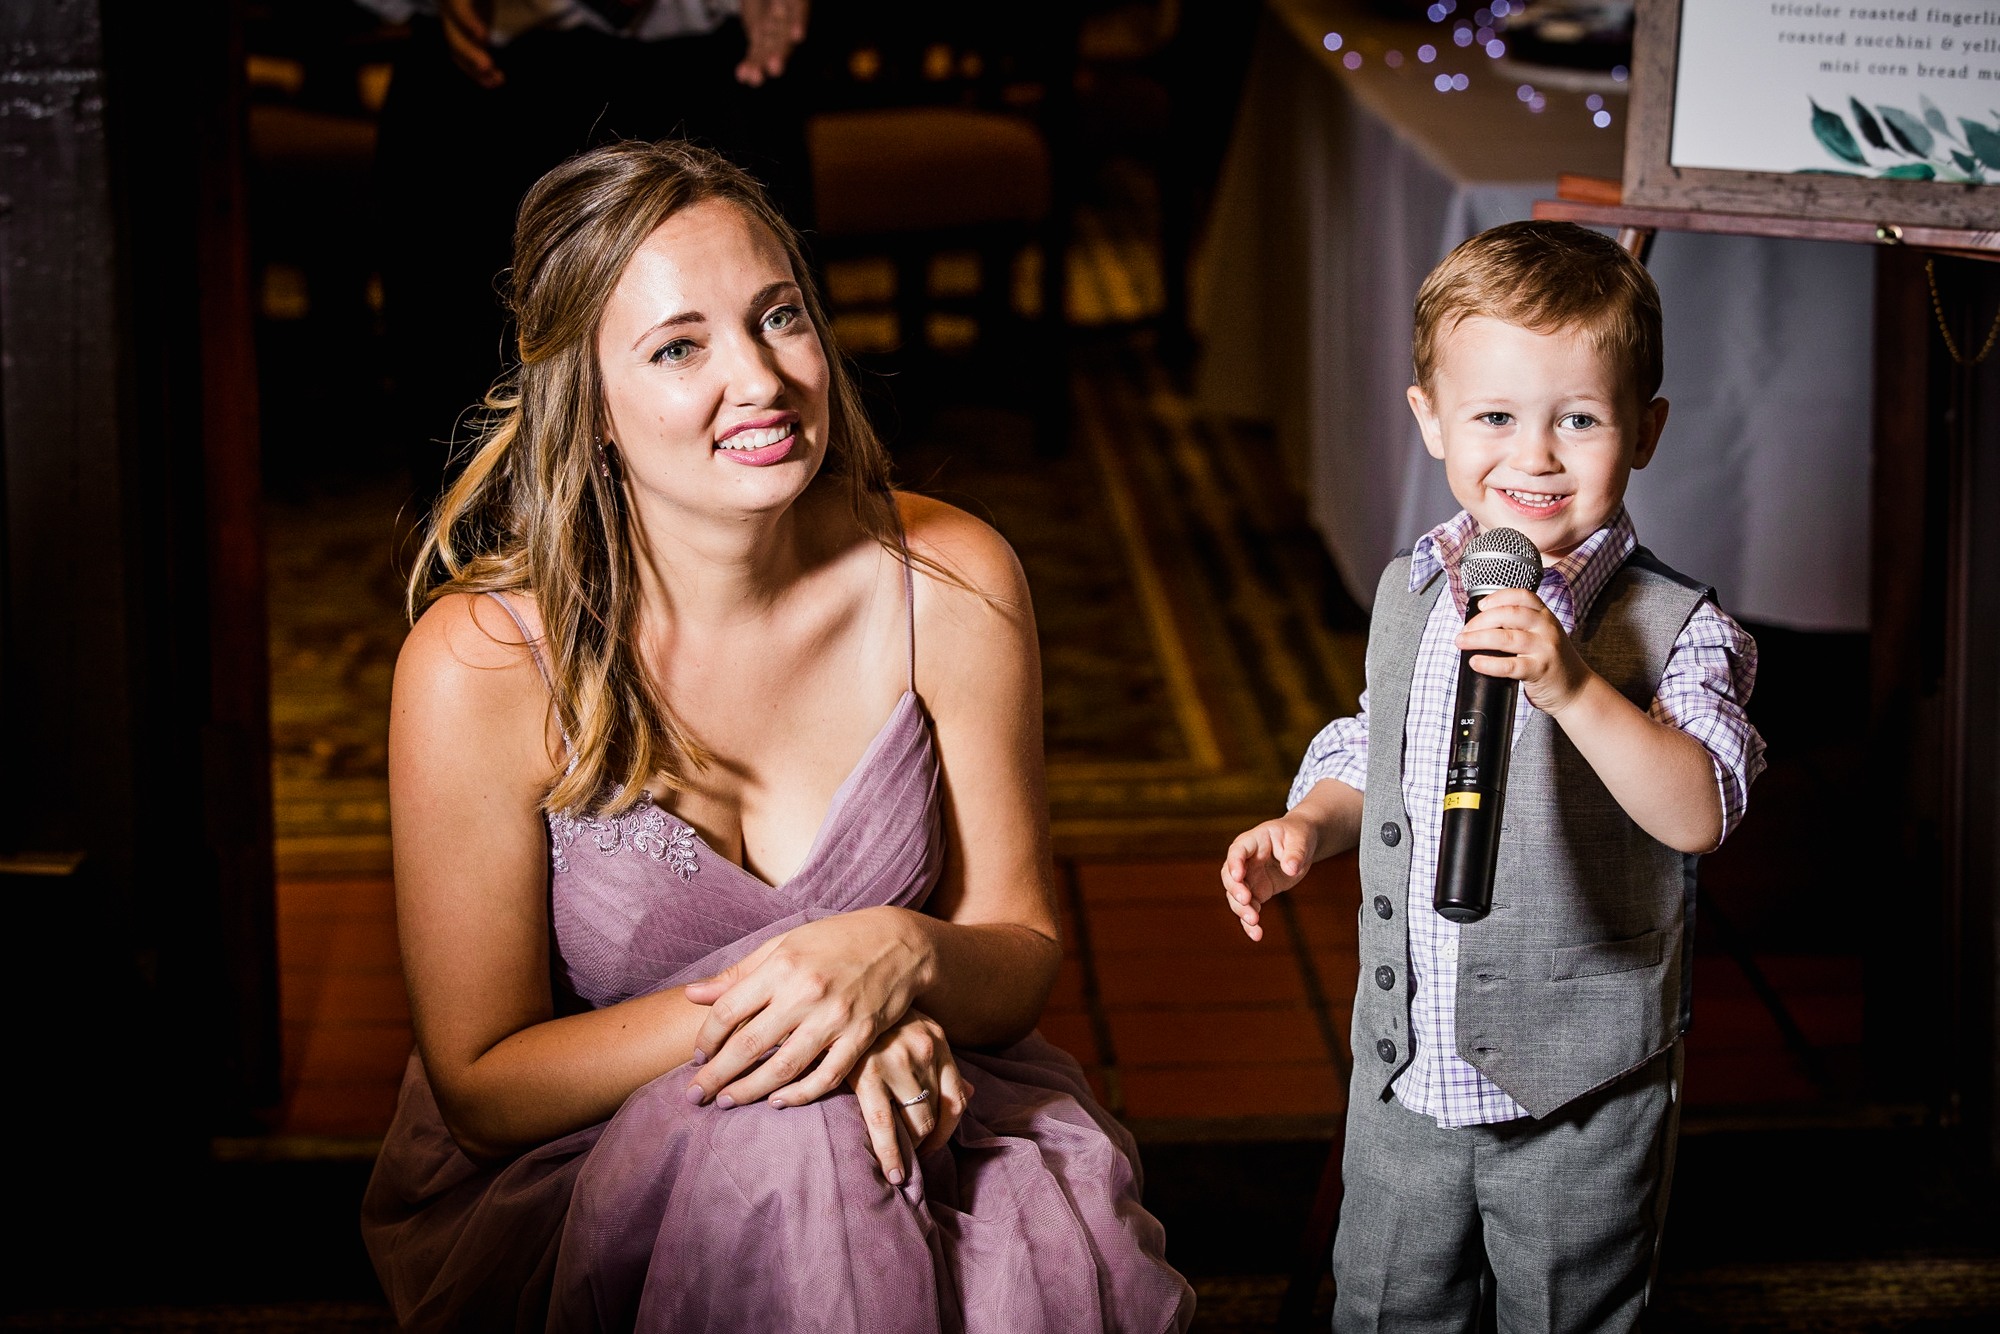 The ring bearer gives a toast during a Katherine Legge Memorial lodge wedding